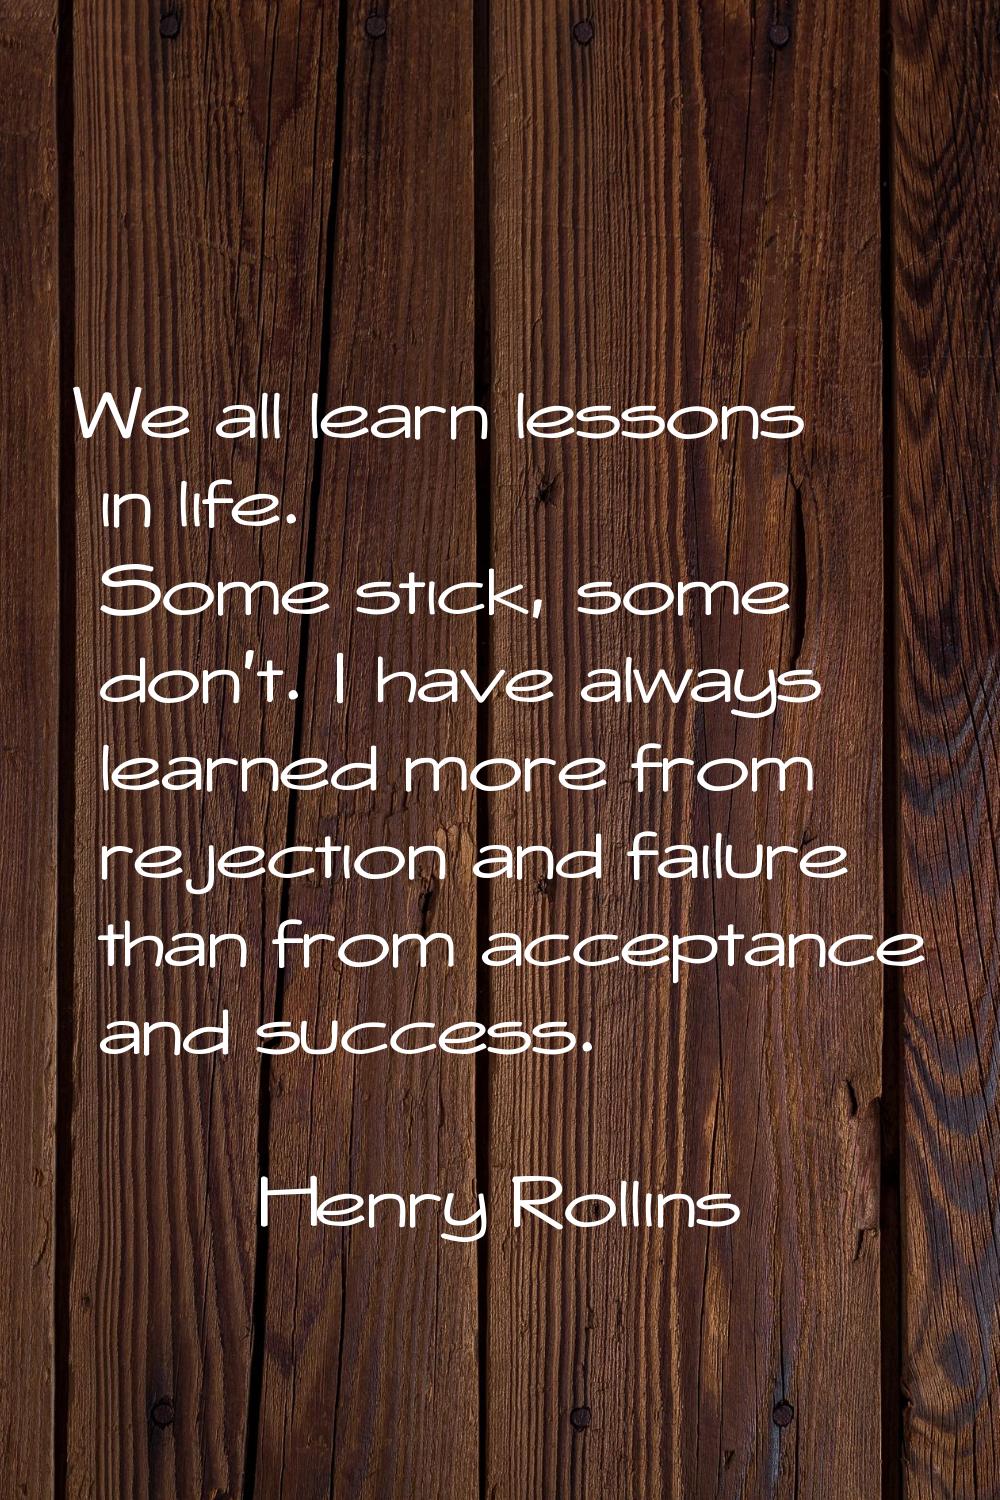 We all learn lessons in life. Some stick, some don't. I have always learned more from rejection and